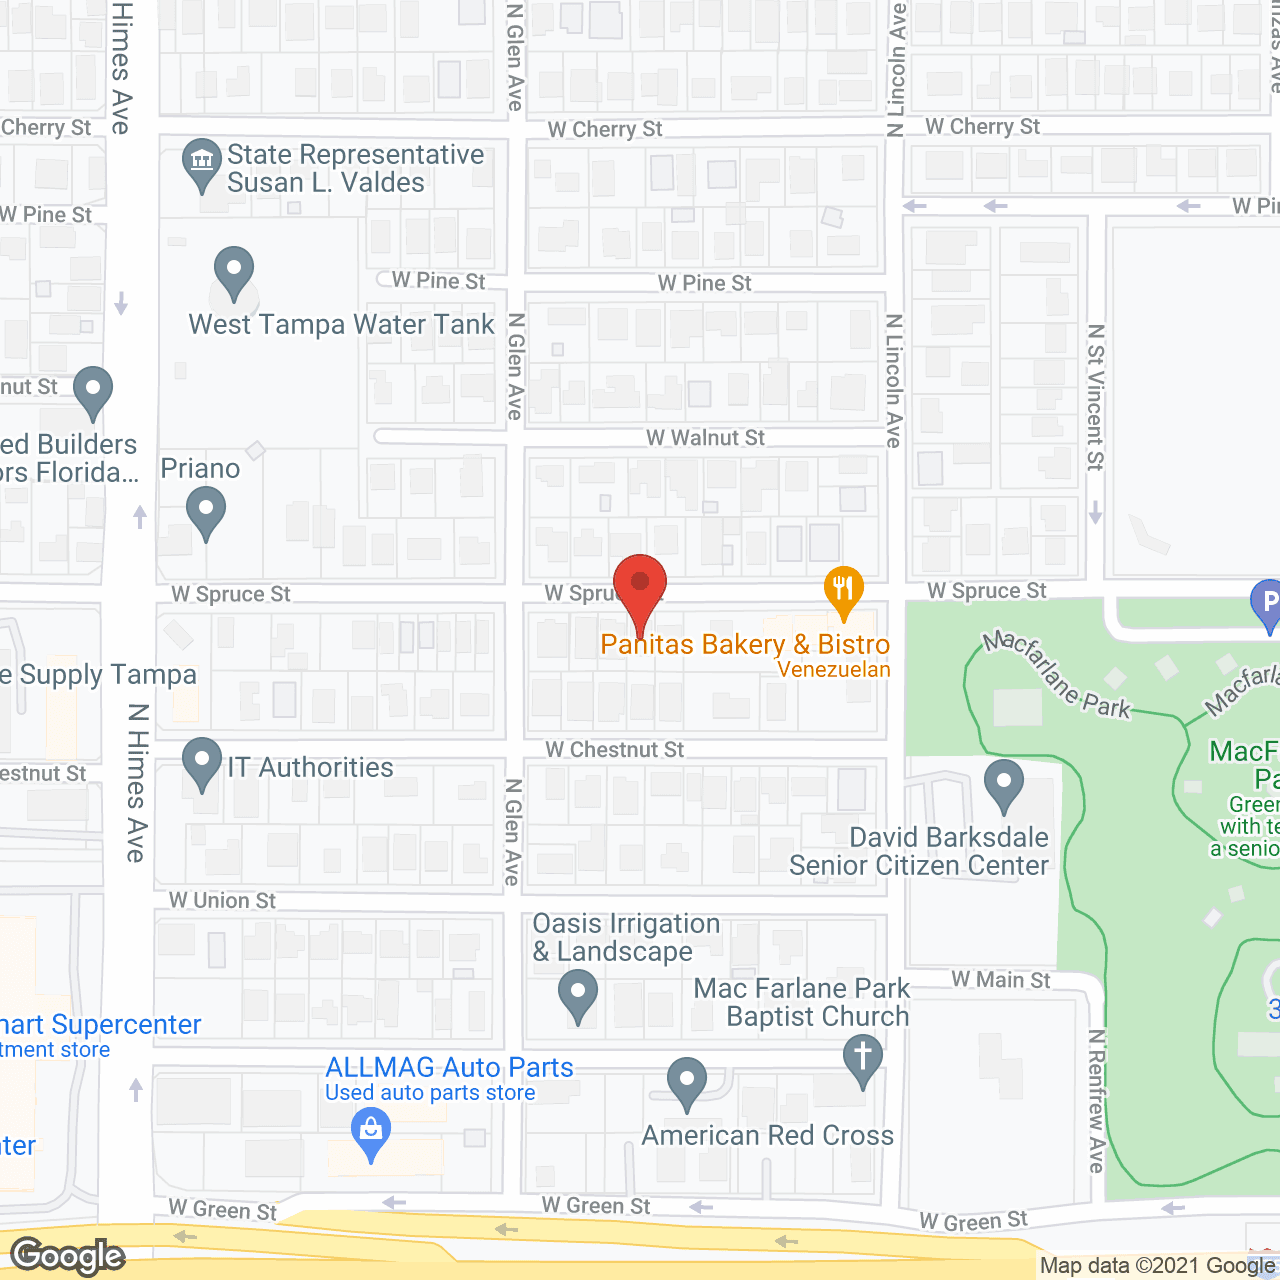 Golden Age Assisted Living Facility of Tampa Bay in google map